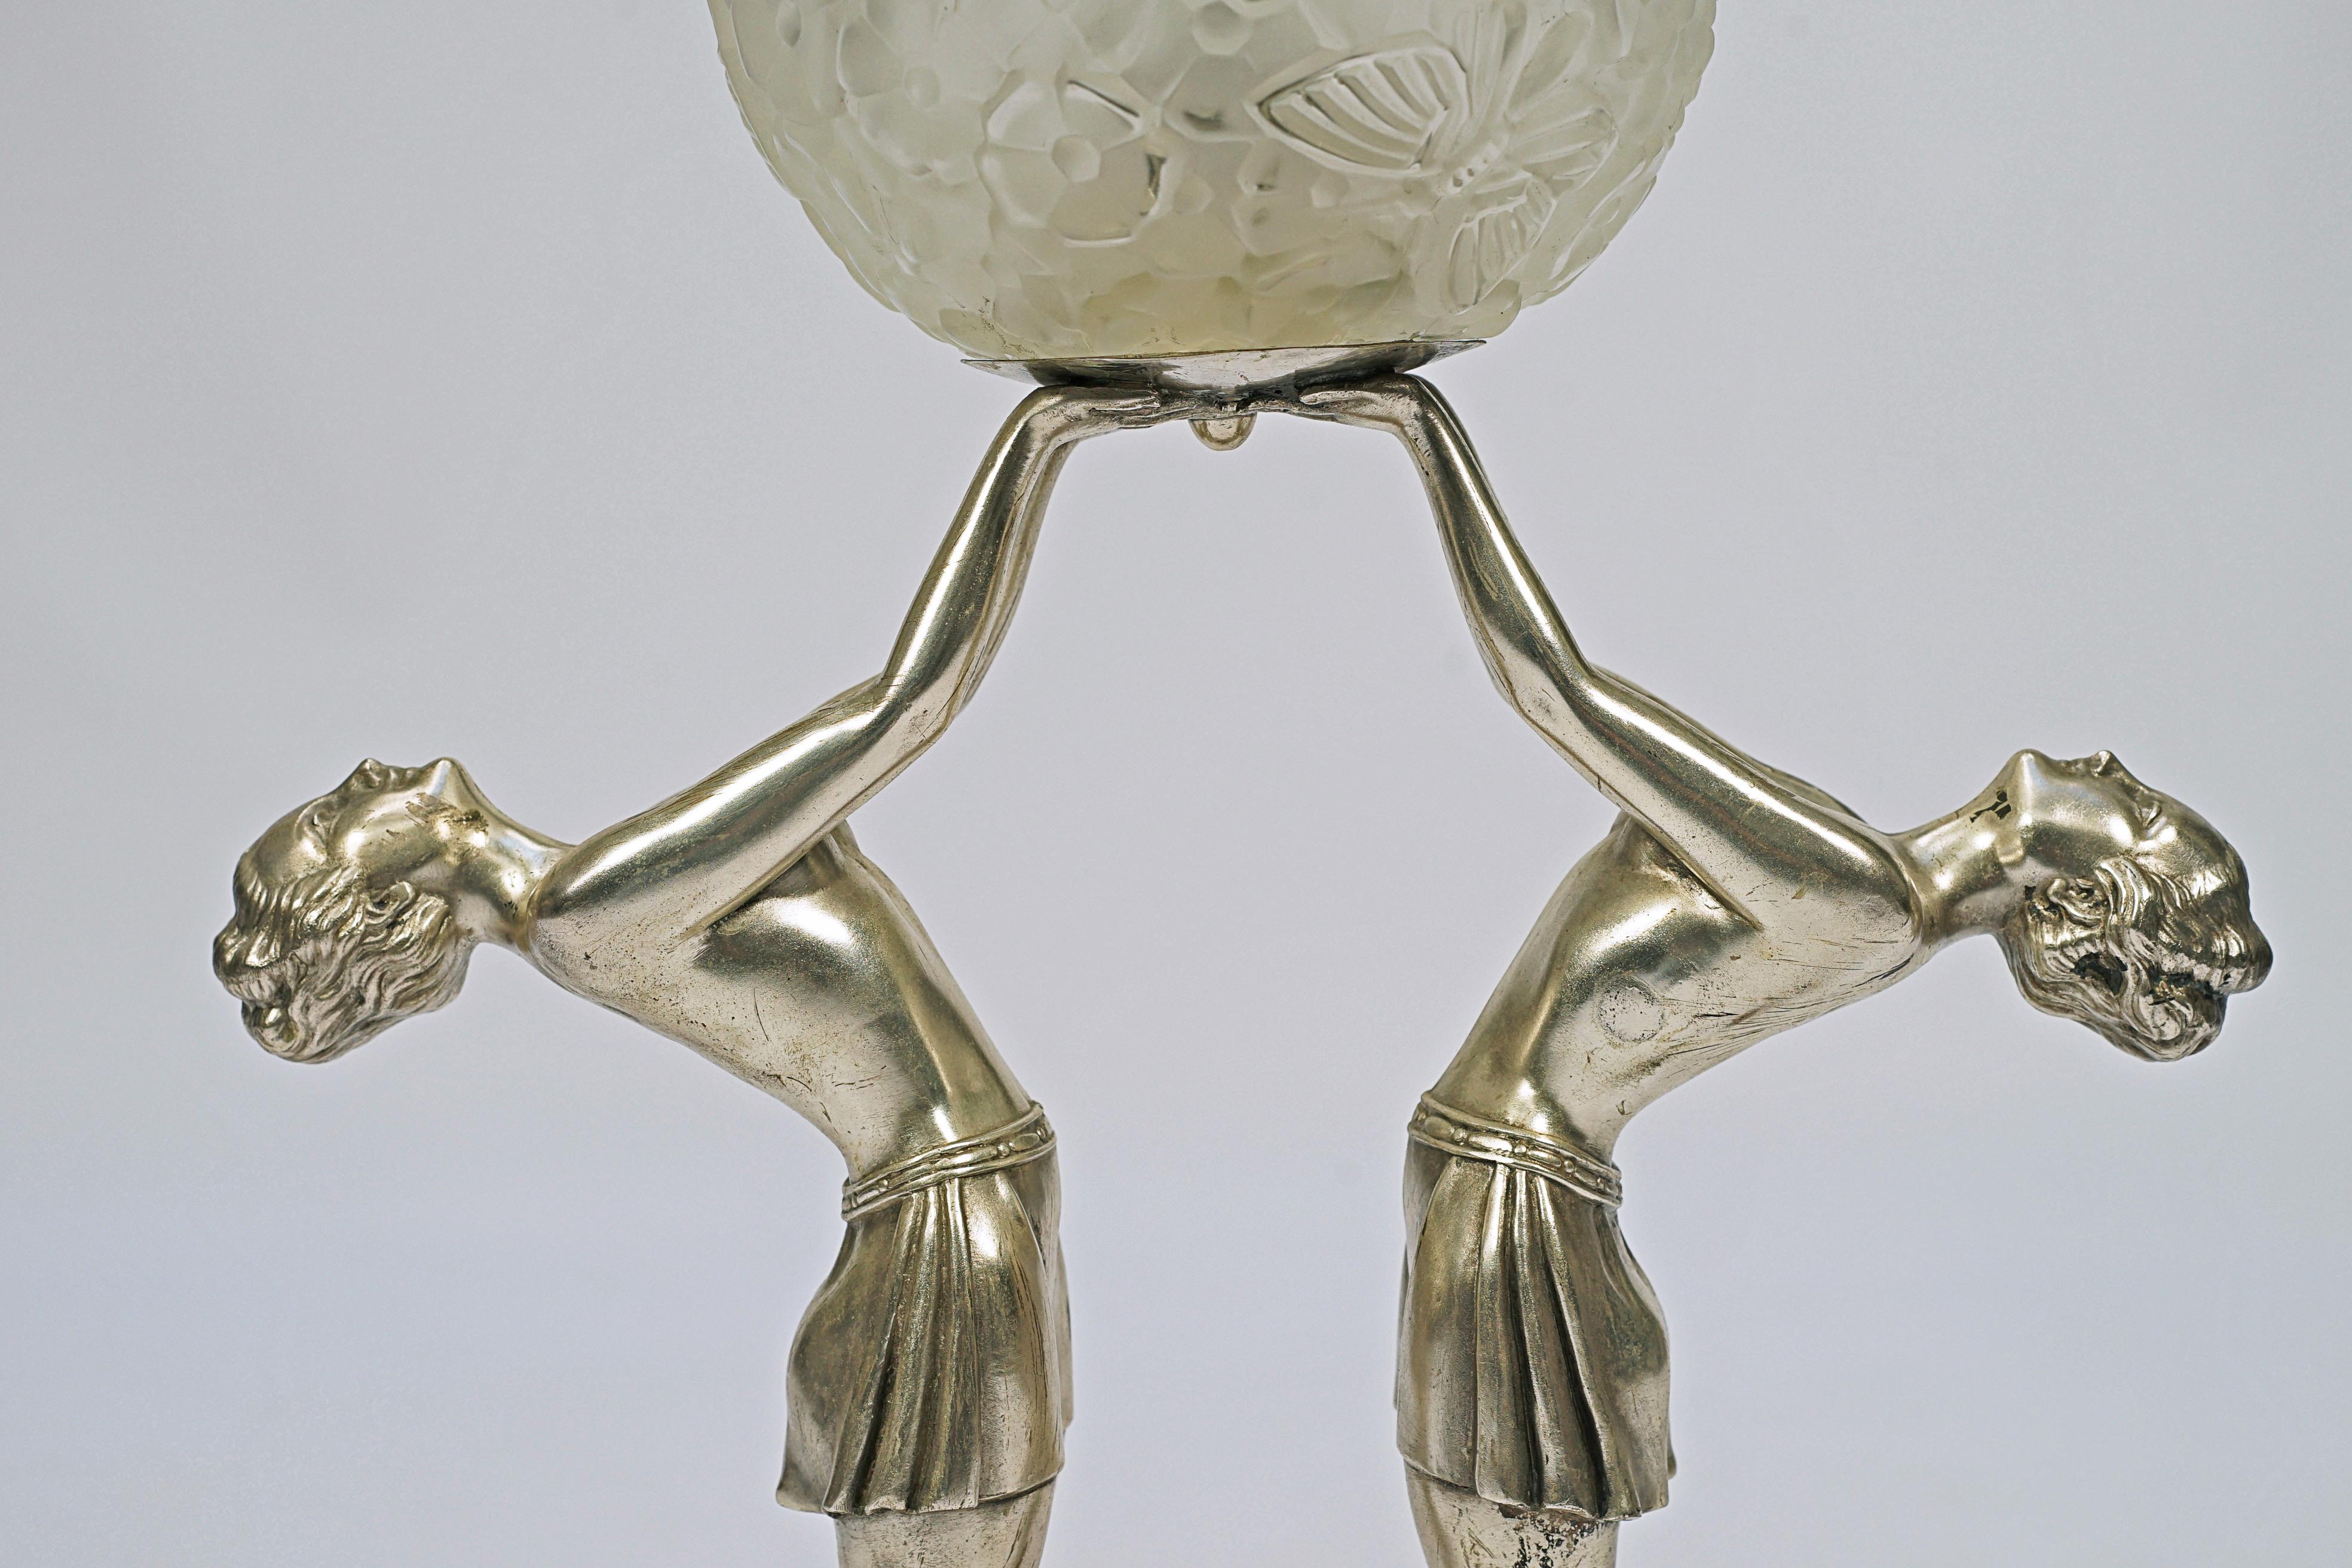 Table lamp by designed Limousin. Silver plated bronze, frosted glass shade and marble base.

France, circa 1930.